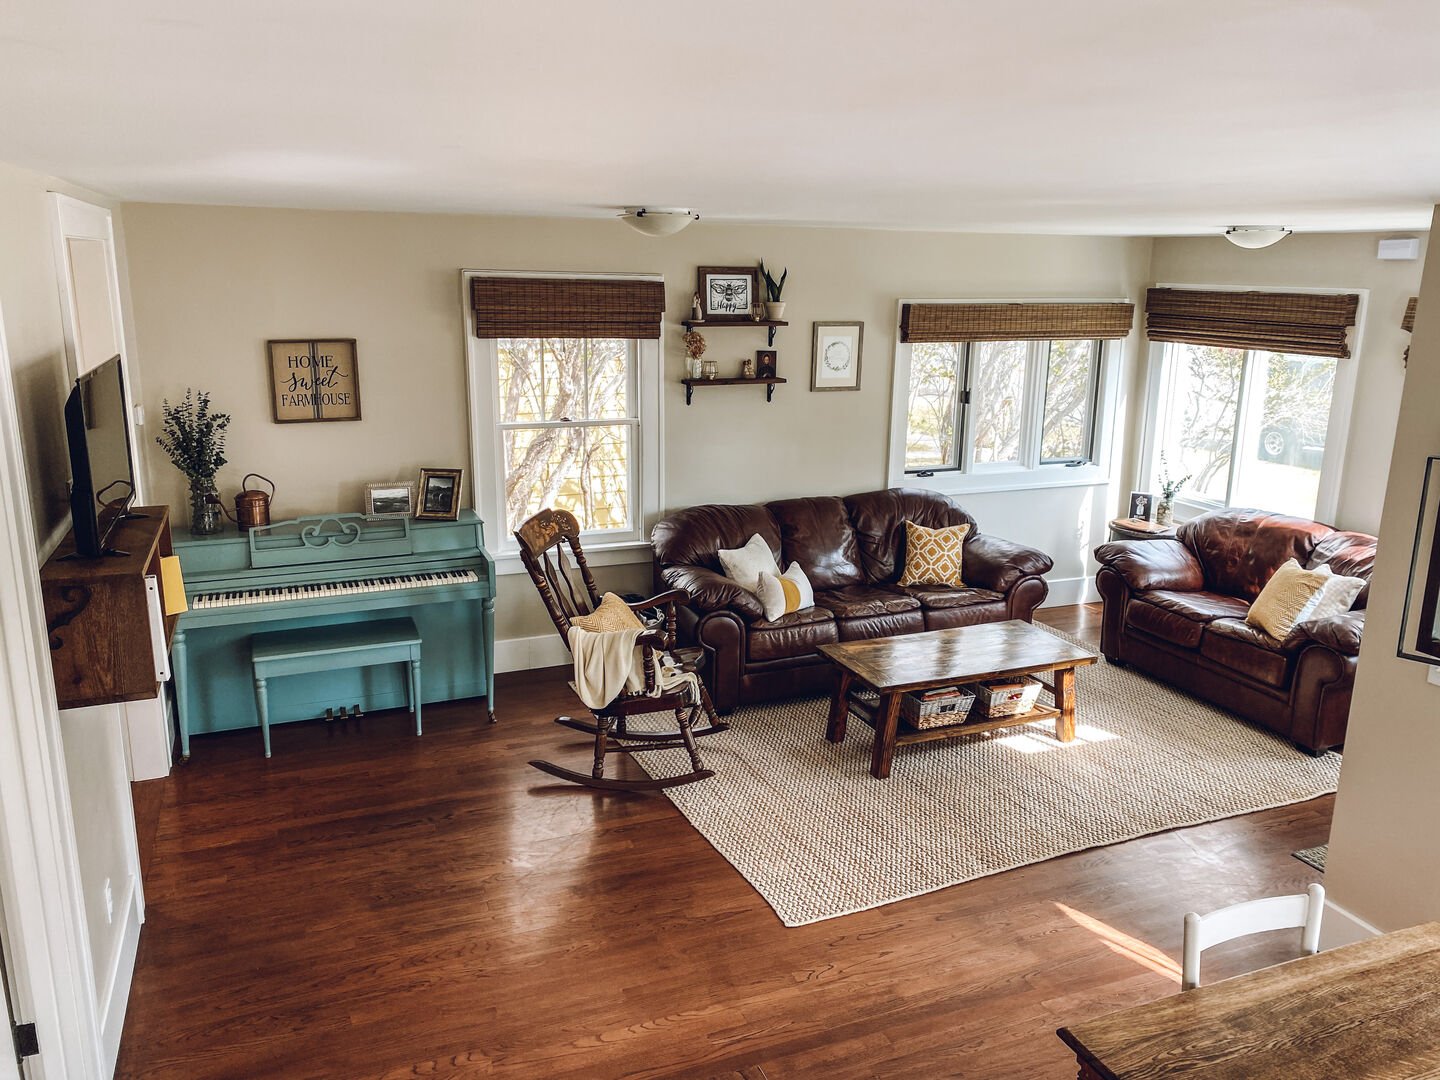 Cozy living area with plenty of natural light and beautifully restored hardwood floors